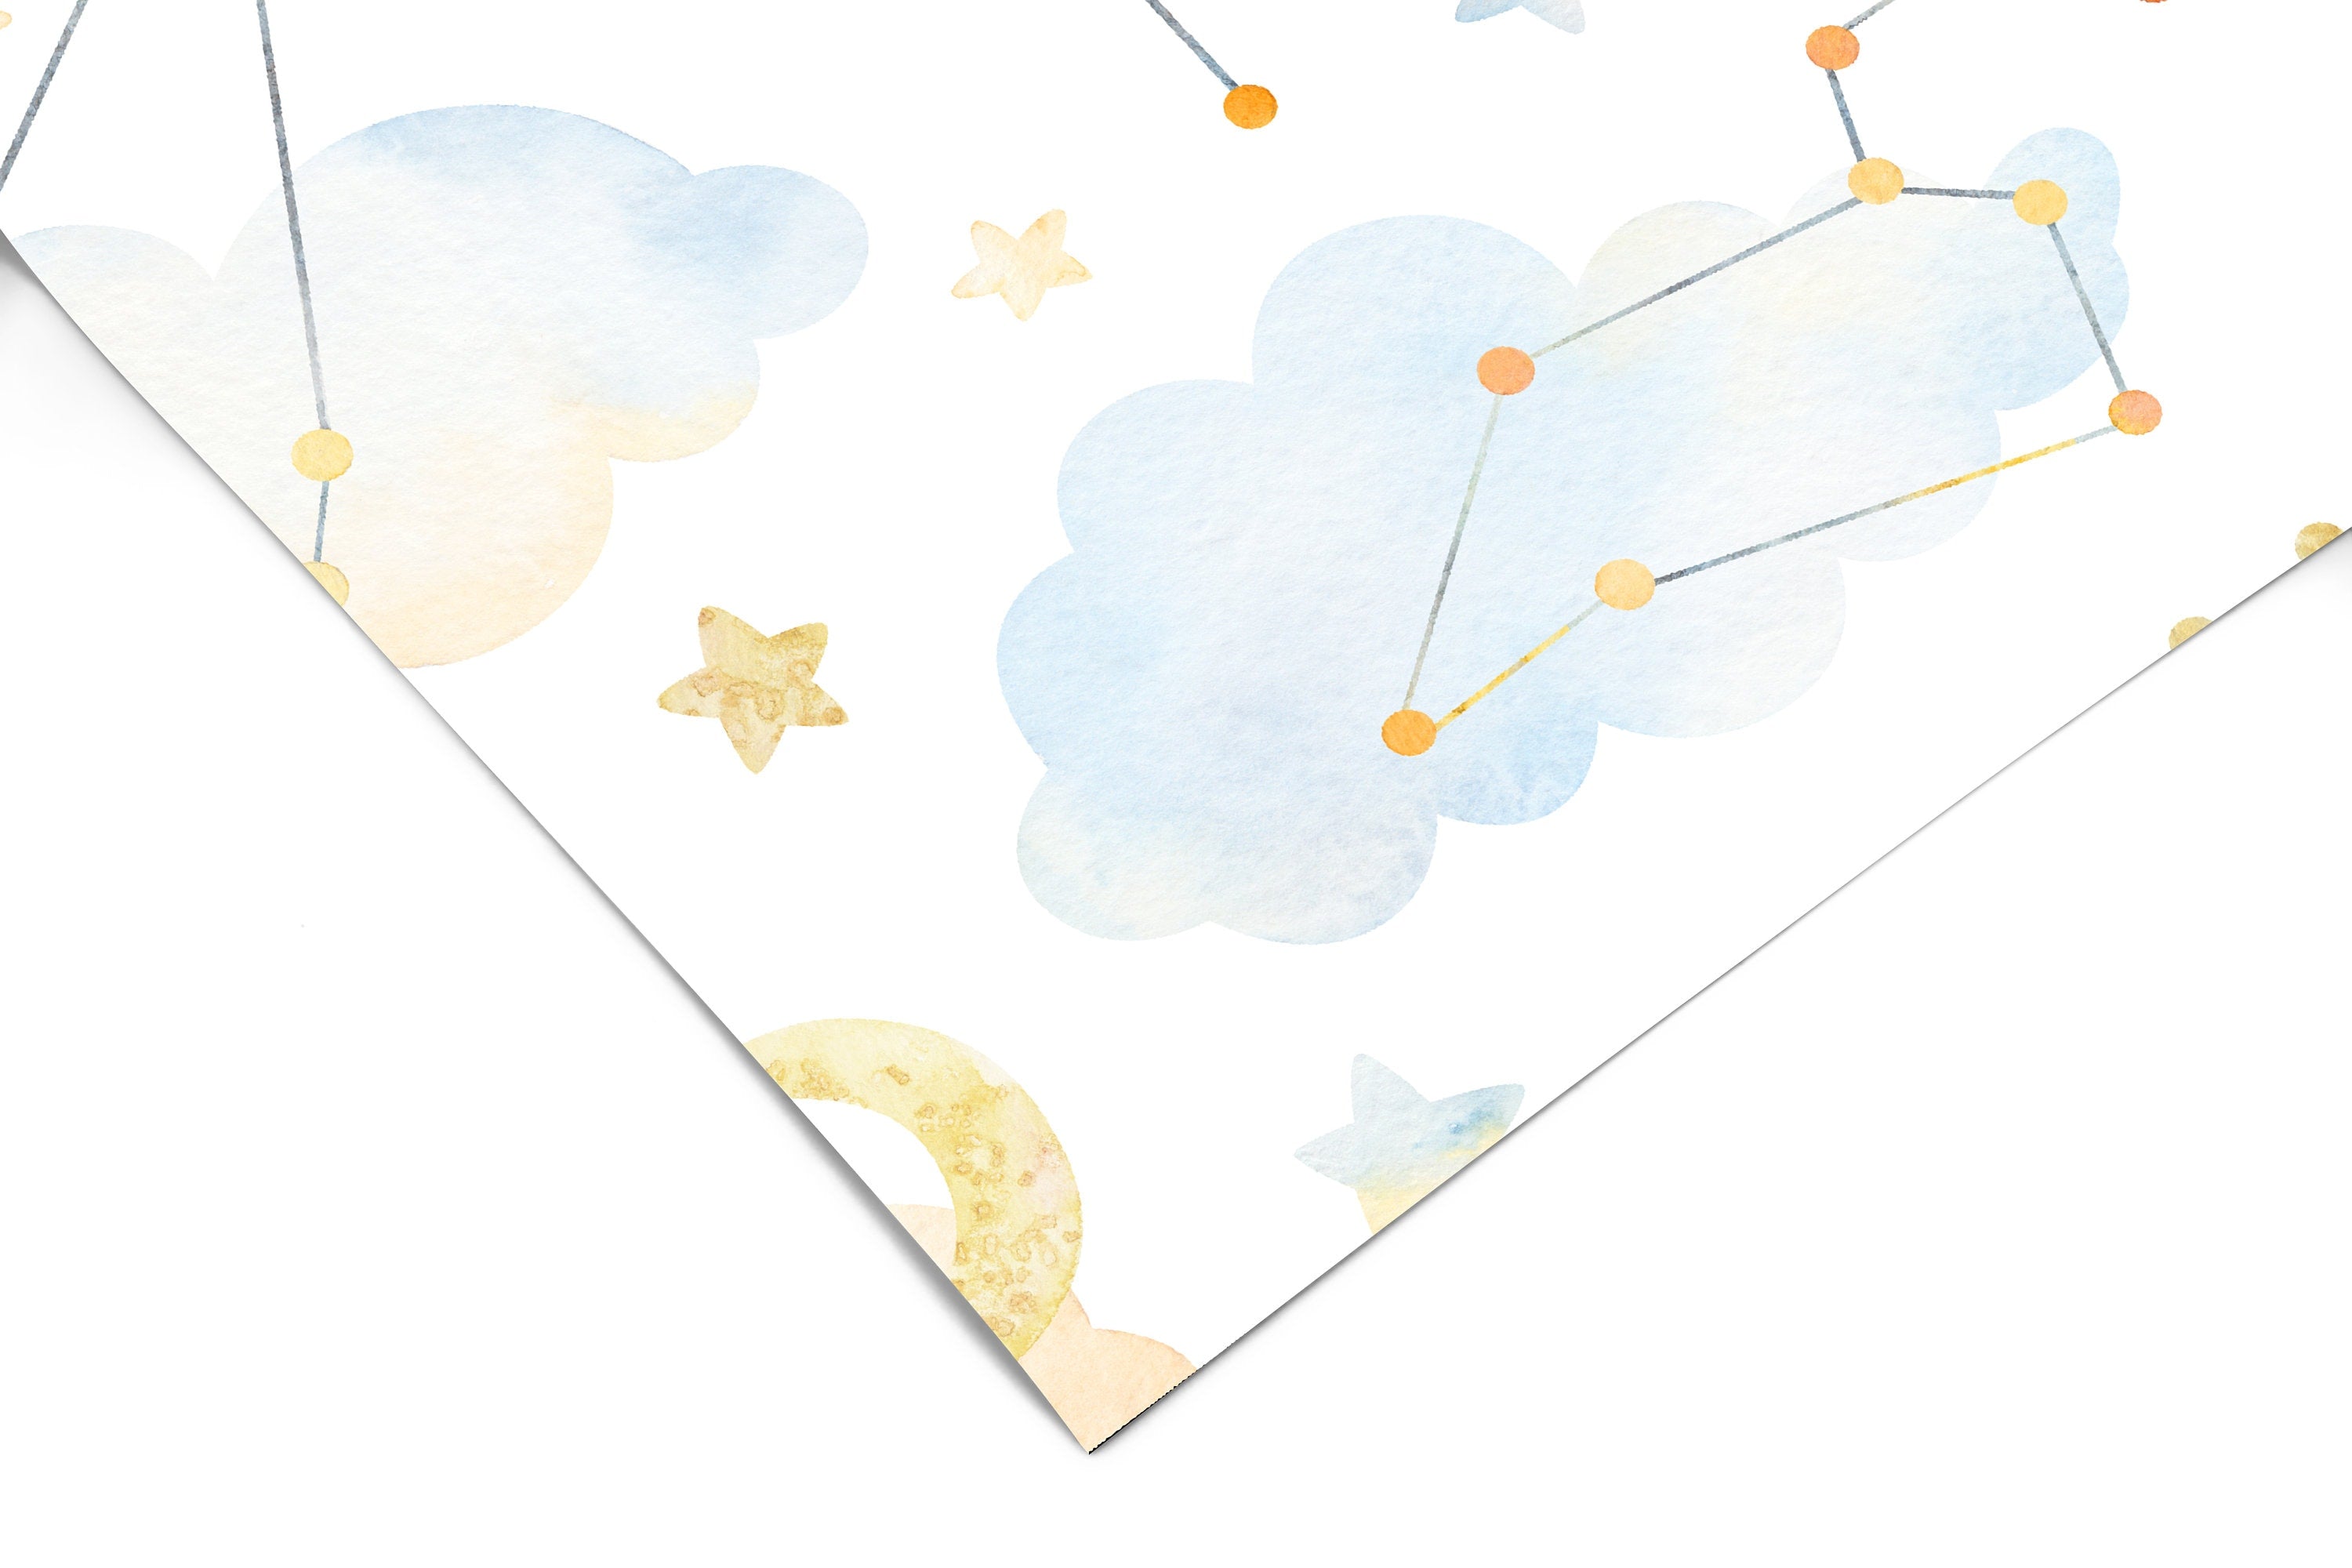 Constellations and Clouds Wallpaper | Girls Nursery Wallpaper | Kids Wallpaper | Childrens Wallpaper | Peel Stick Removable Wallpaper | 3913 - JamesAndColors